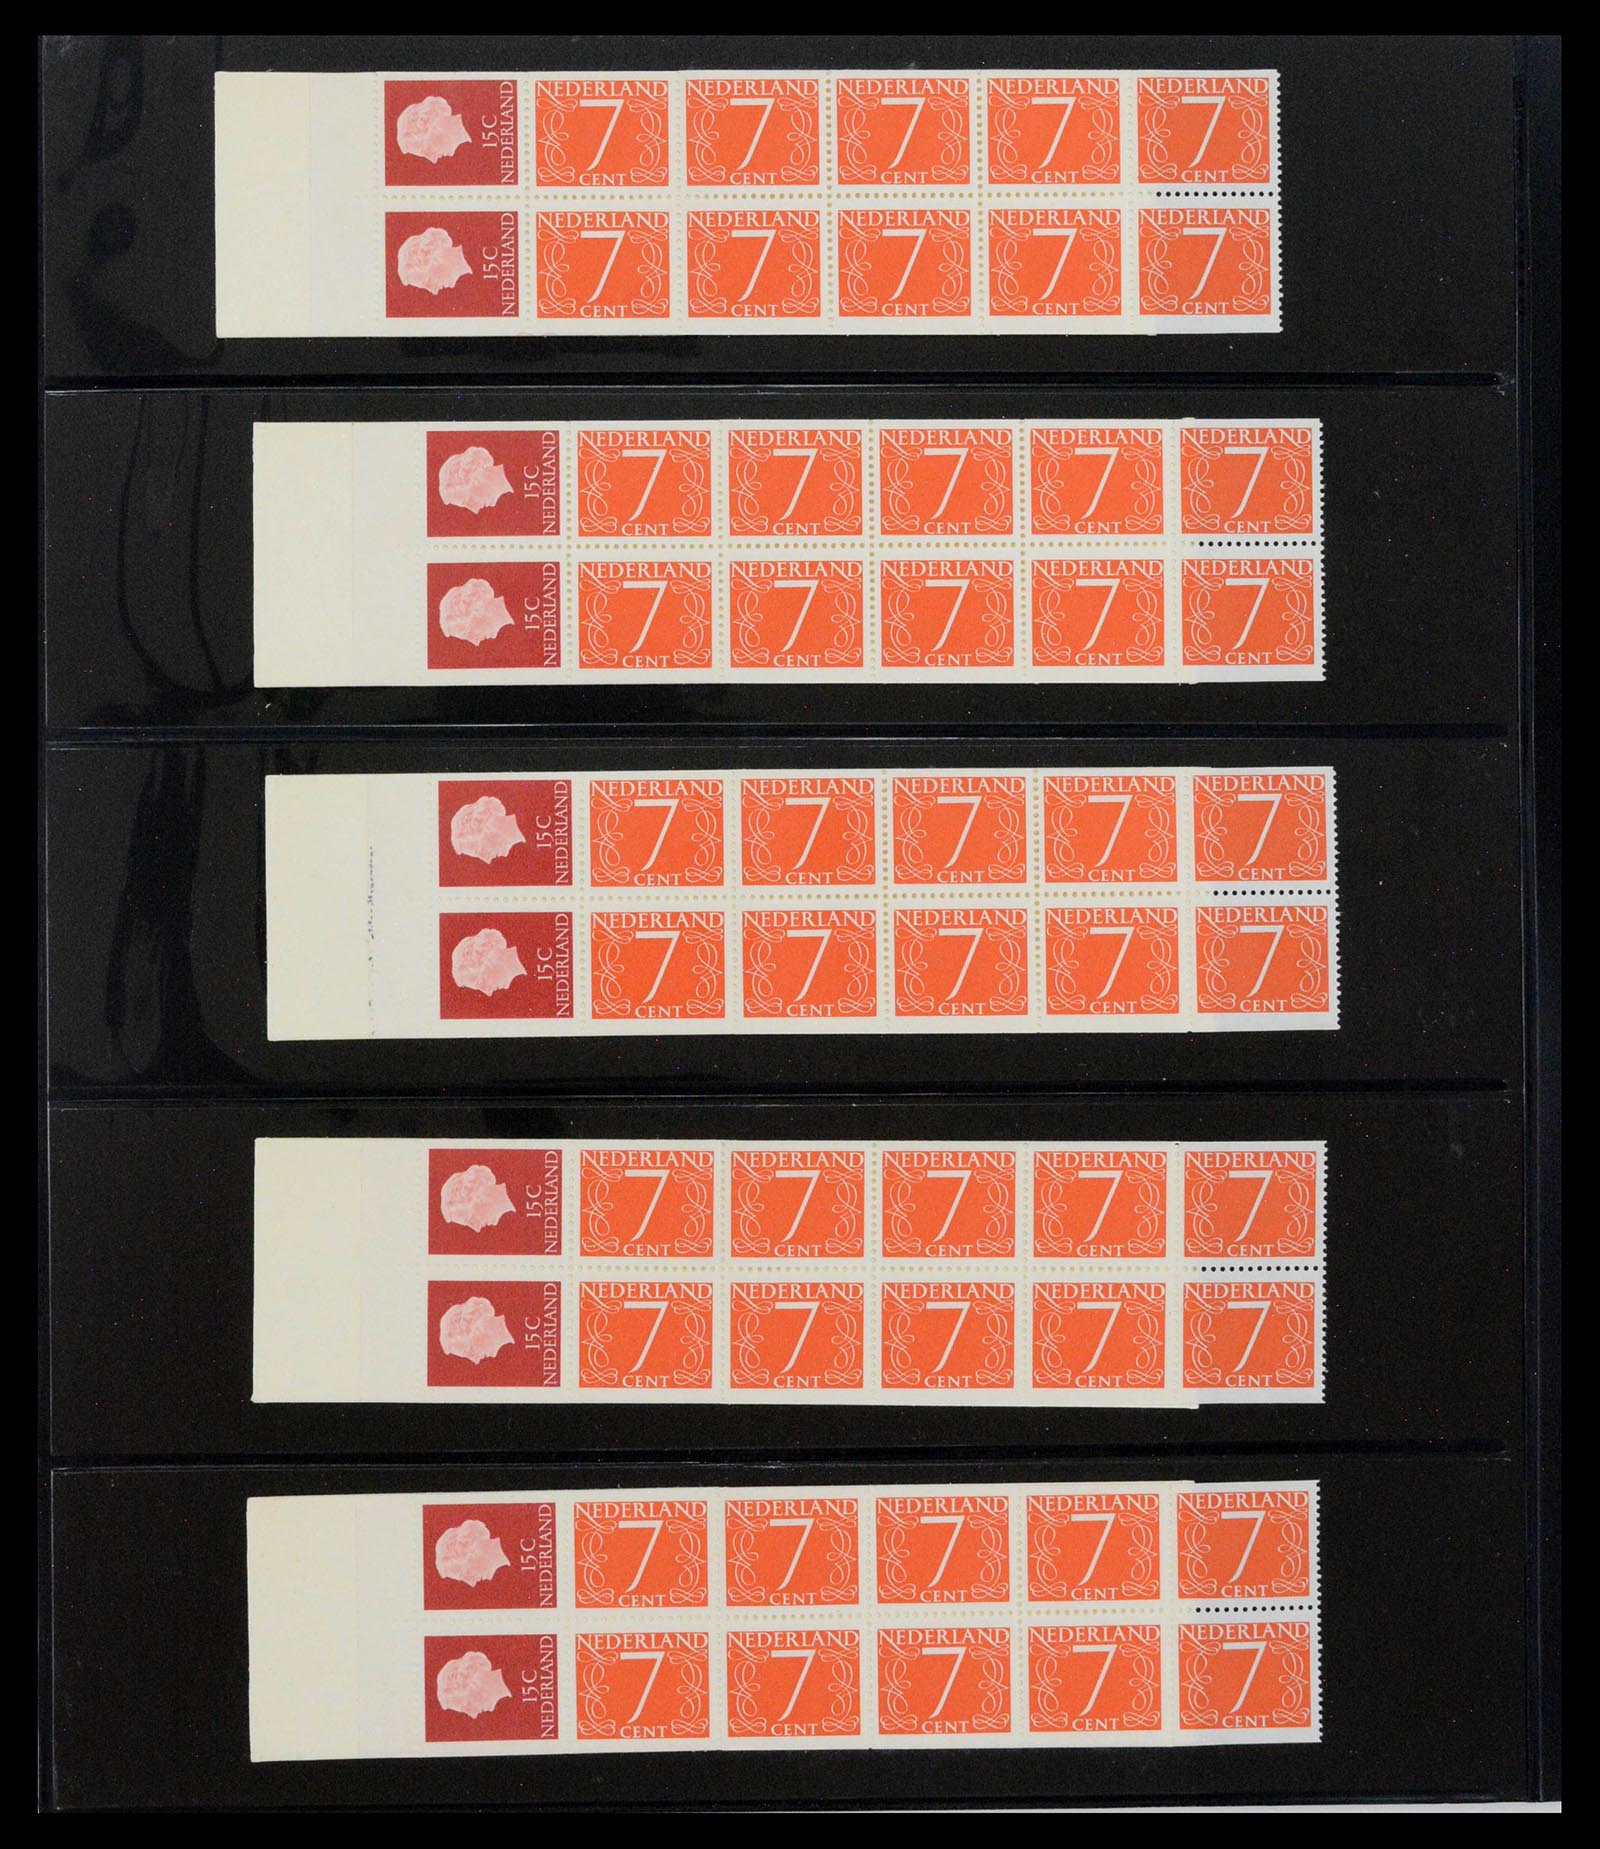 39034 0002 - Stamp collection 39034 Netherlands 1964-1976.